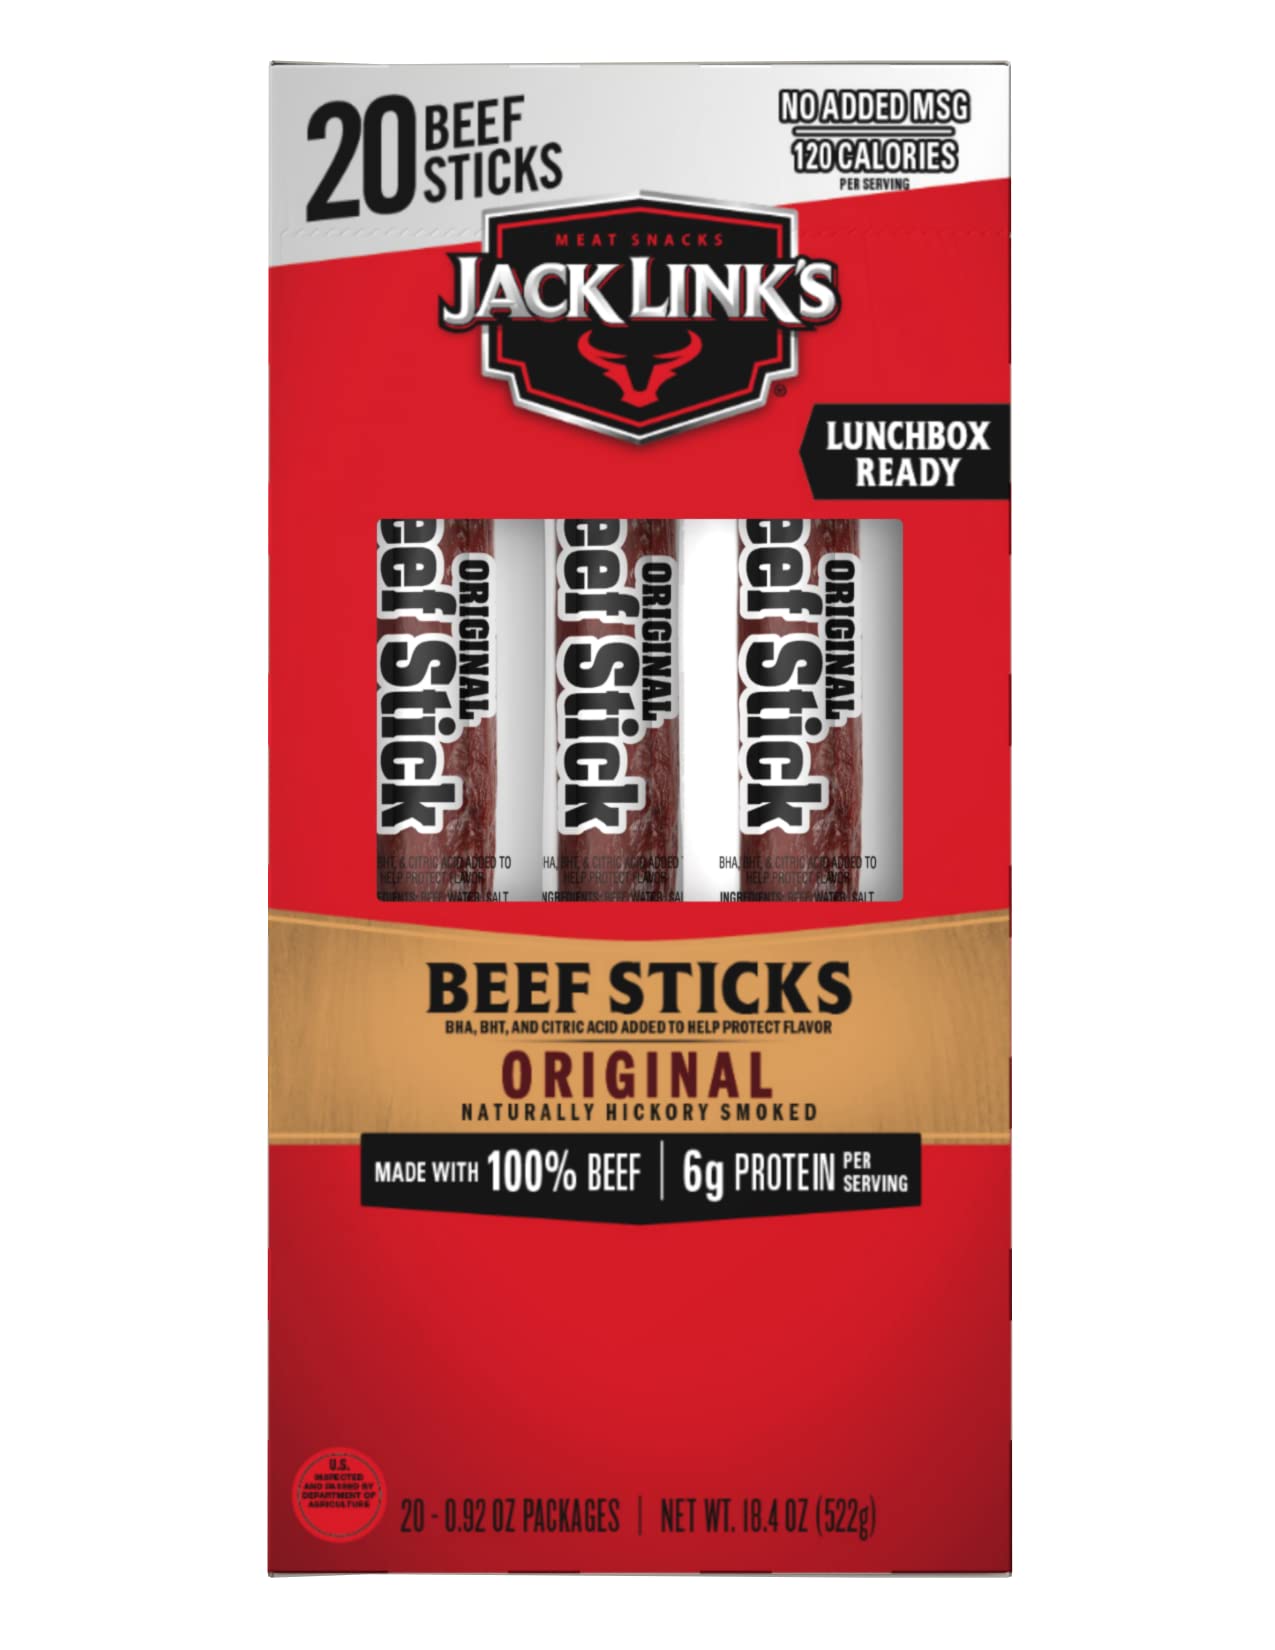 Jack Link's Beef Sticks, Original – Protein Snack, Meat Stick with 6g of Protein, Made with 100% Beef, Great Stocking Stuffer Gift, No Added MSG – 0.92 Oz. (20 Count)